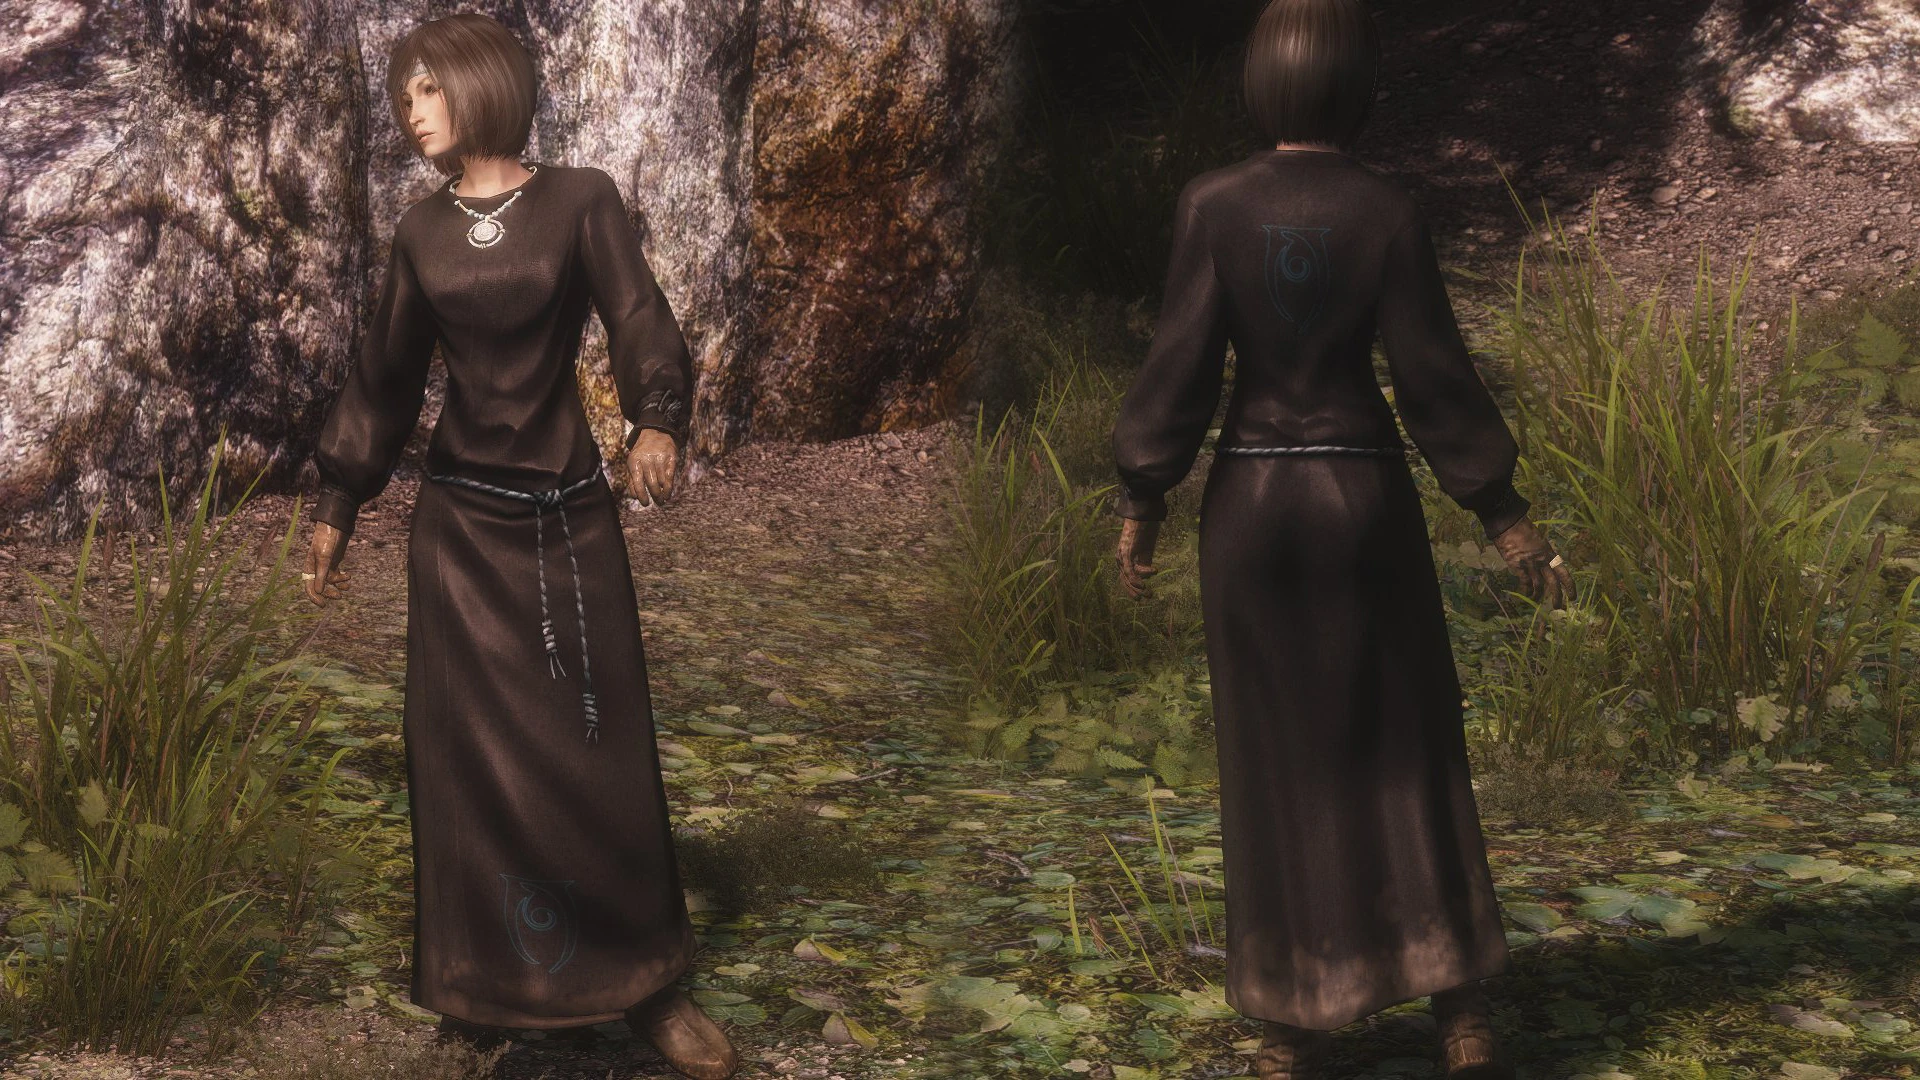 robes, nether mage armor at skyrim nexus mods and community, blog post 6 wo...